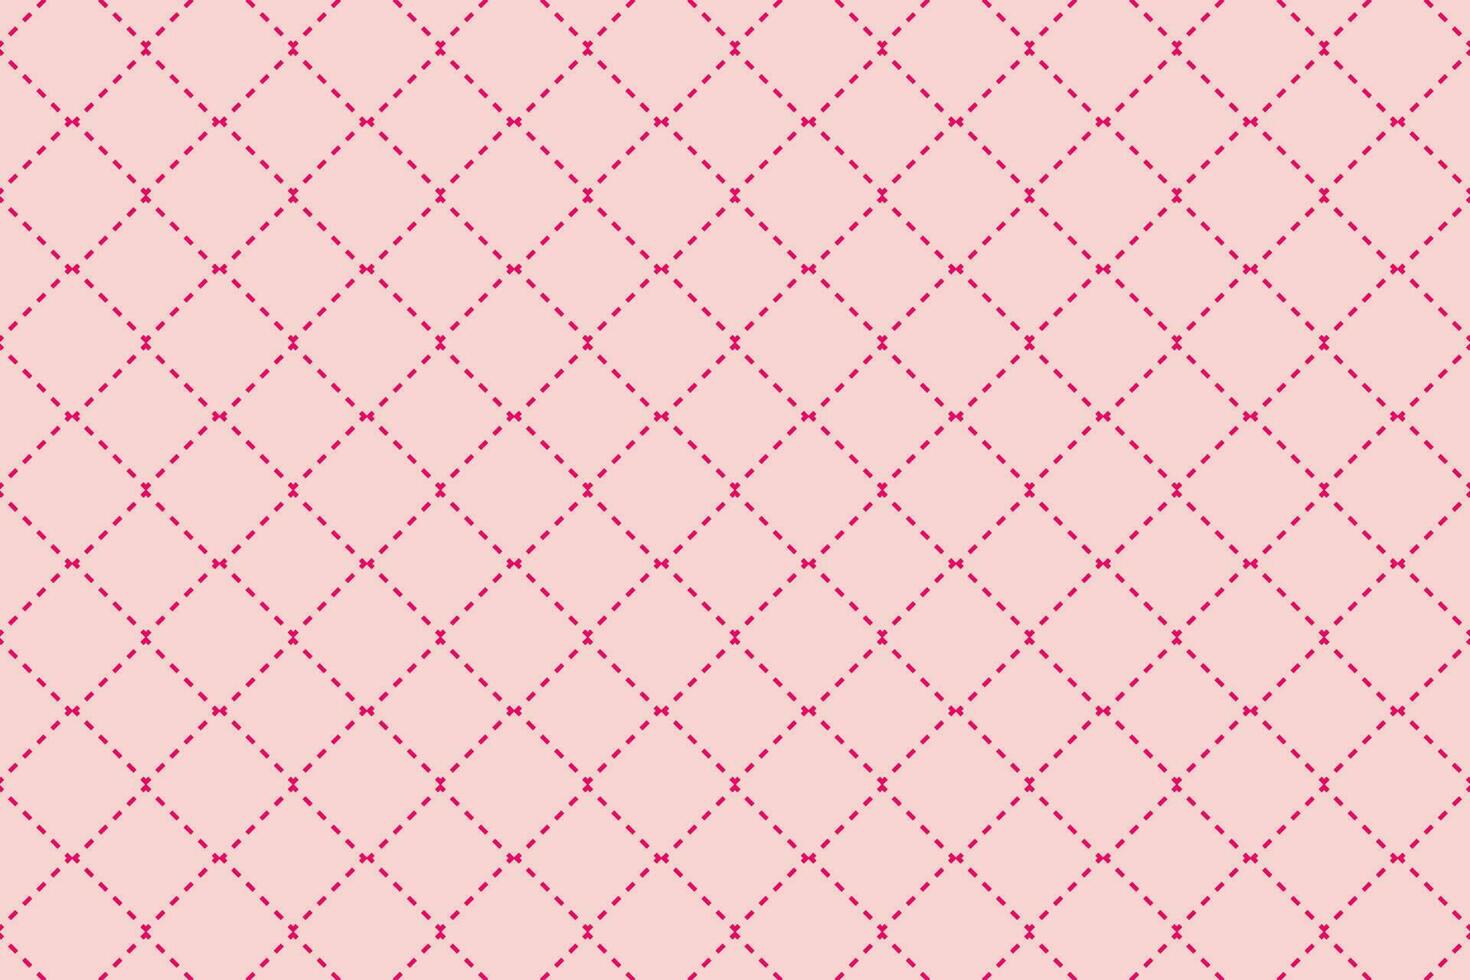 Pink dashed crisscross lines pattern. Dash lines cross rhombus grid vector background.